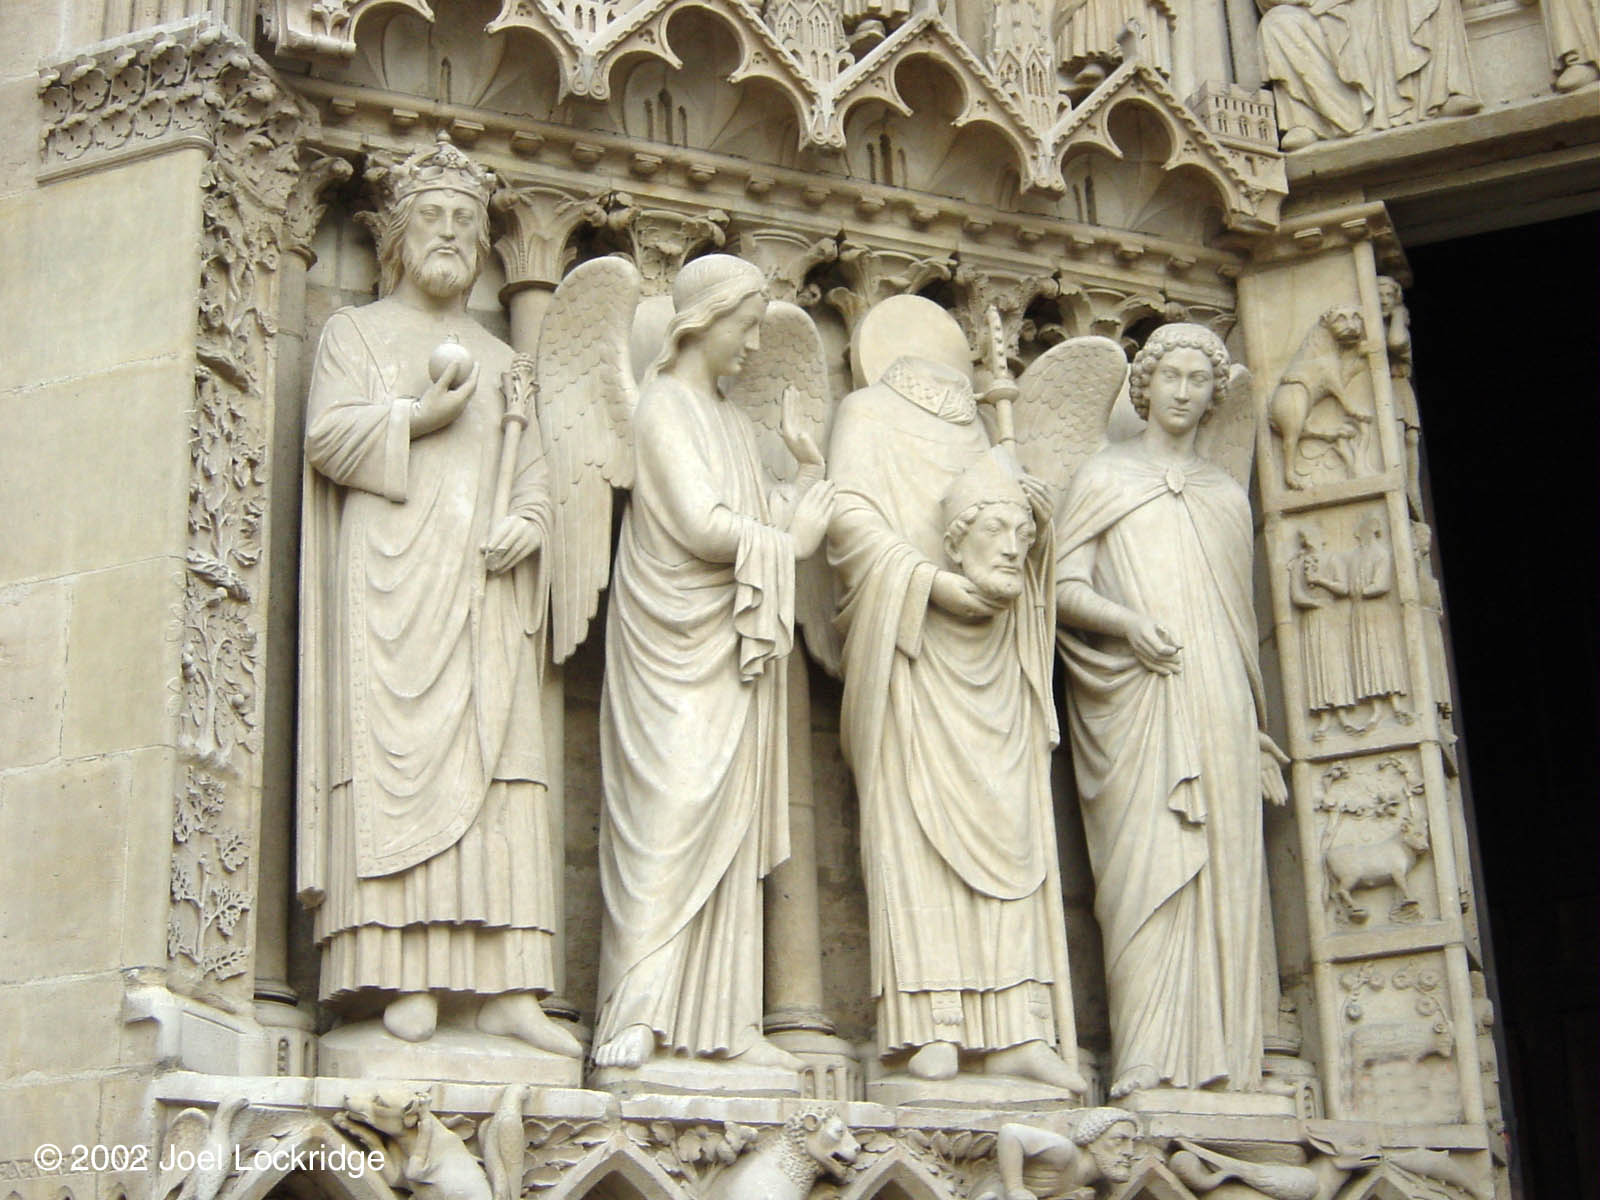 Outside of one of the main arched doorways.  Notice the figure holding his own head.